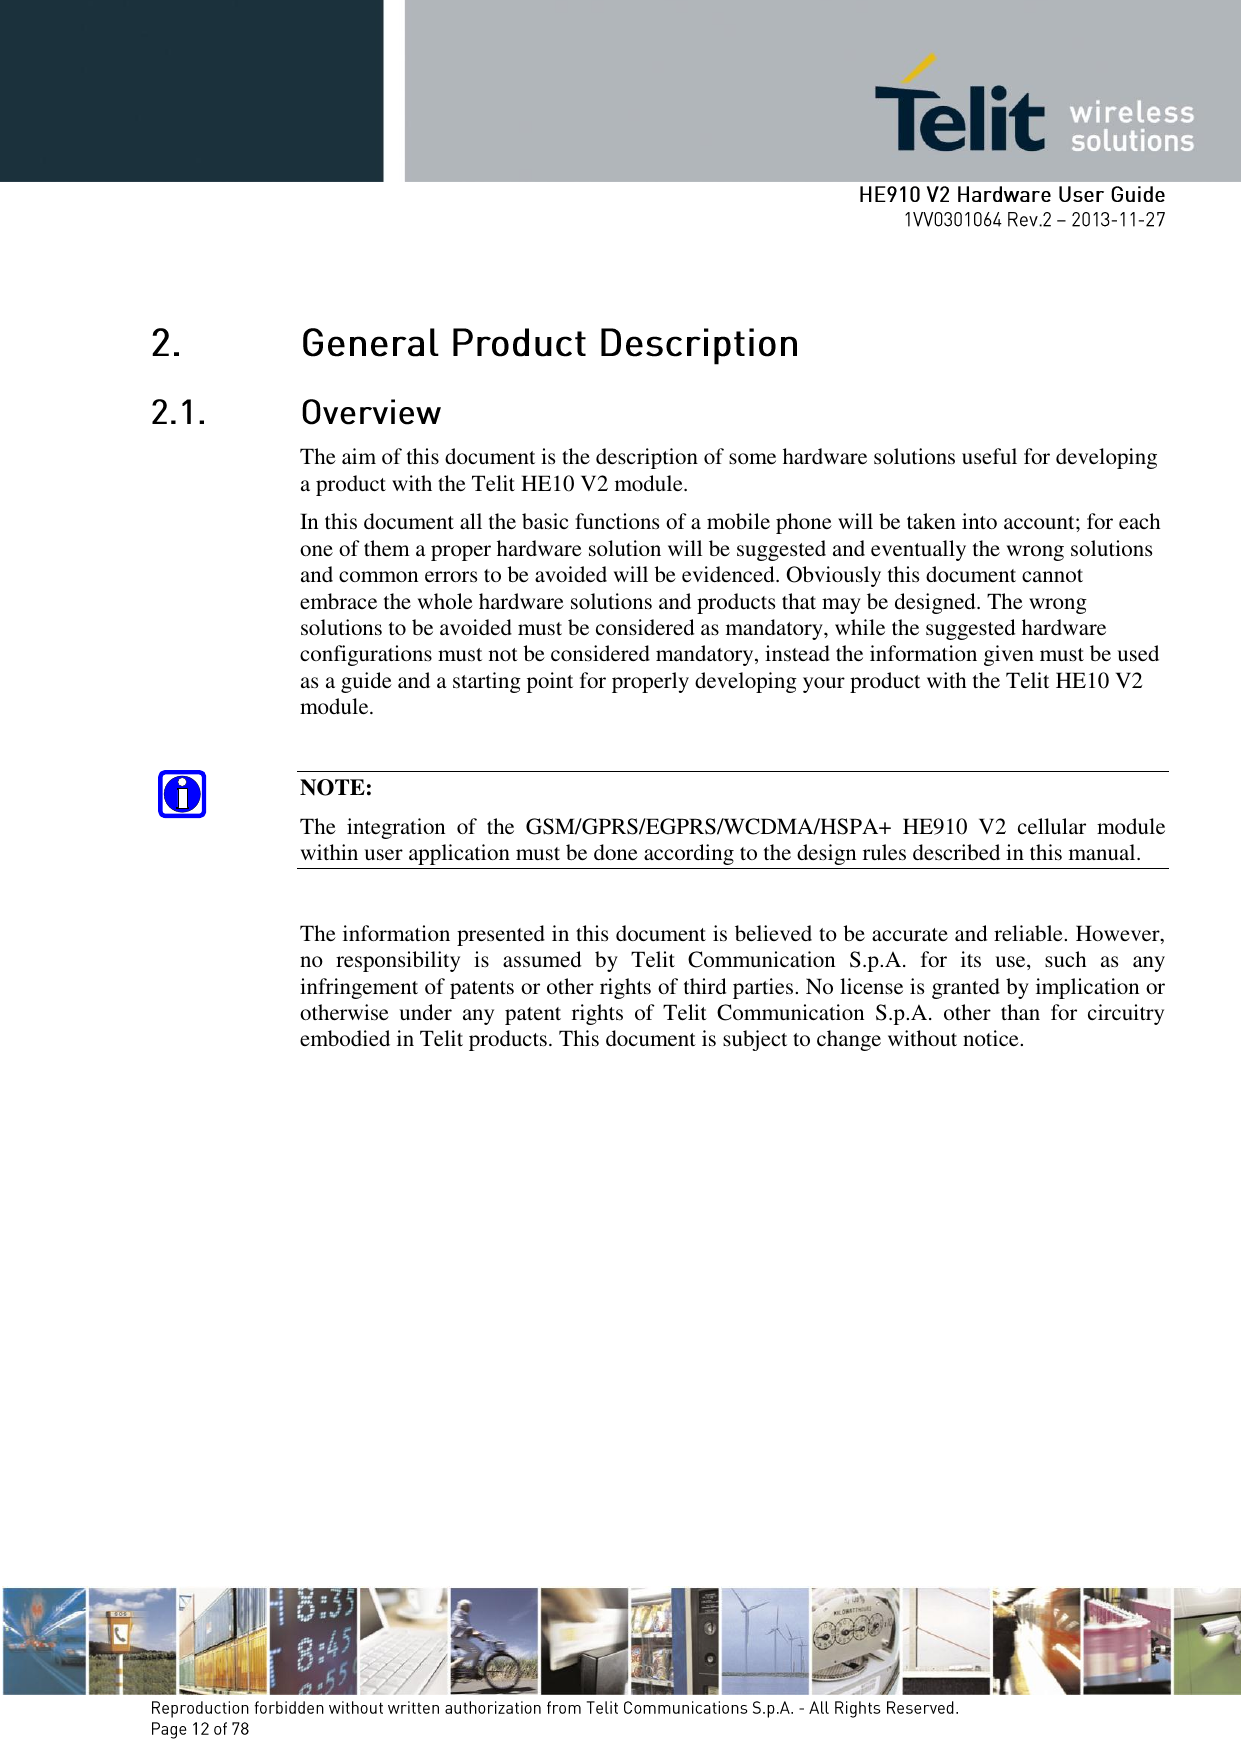         The aim of this document is the description of some hardware solutions useful for developing a product with the Telit HE10 V2 module. In this document all the basic functions of a mobile phone will be taken into account; for each one of them a proper hardware solution will be suggested and eventually the wrong solutions and common errors to be avoided will be evidenced. Obviously this document cannot embrace the whole hardware solutions and products that may be designed. The wrong solutions to be avoided must be considered as mandatory, while the suggested hardware configurations must not be considered mandatory, instead the information given must be used as a guide and a starting point for properly developing your product with the Telit HE10 V2 module.  NOTE: The  integration  of  the  GSM/GPRS/EGPRS/WCDMA/HSPA+  HE910  V2  cellular  module within user application must be done according to the design rules described in this manual.  The information presented in this document is believed to be accurate and reliable. However, no  responsibility  is  assumed  by  Telit  Communication  S.p.A.  for  its  use,  such  as  any infringement of patents or other rights of third parties. No license is granted by implication or otherwise  under  any  patent  rights  of  Telit  Communication  S.p.A.  other  than  for  circuitry embodied in Telit products. This document is subject to change without notice. 